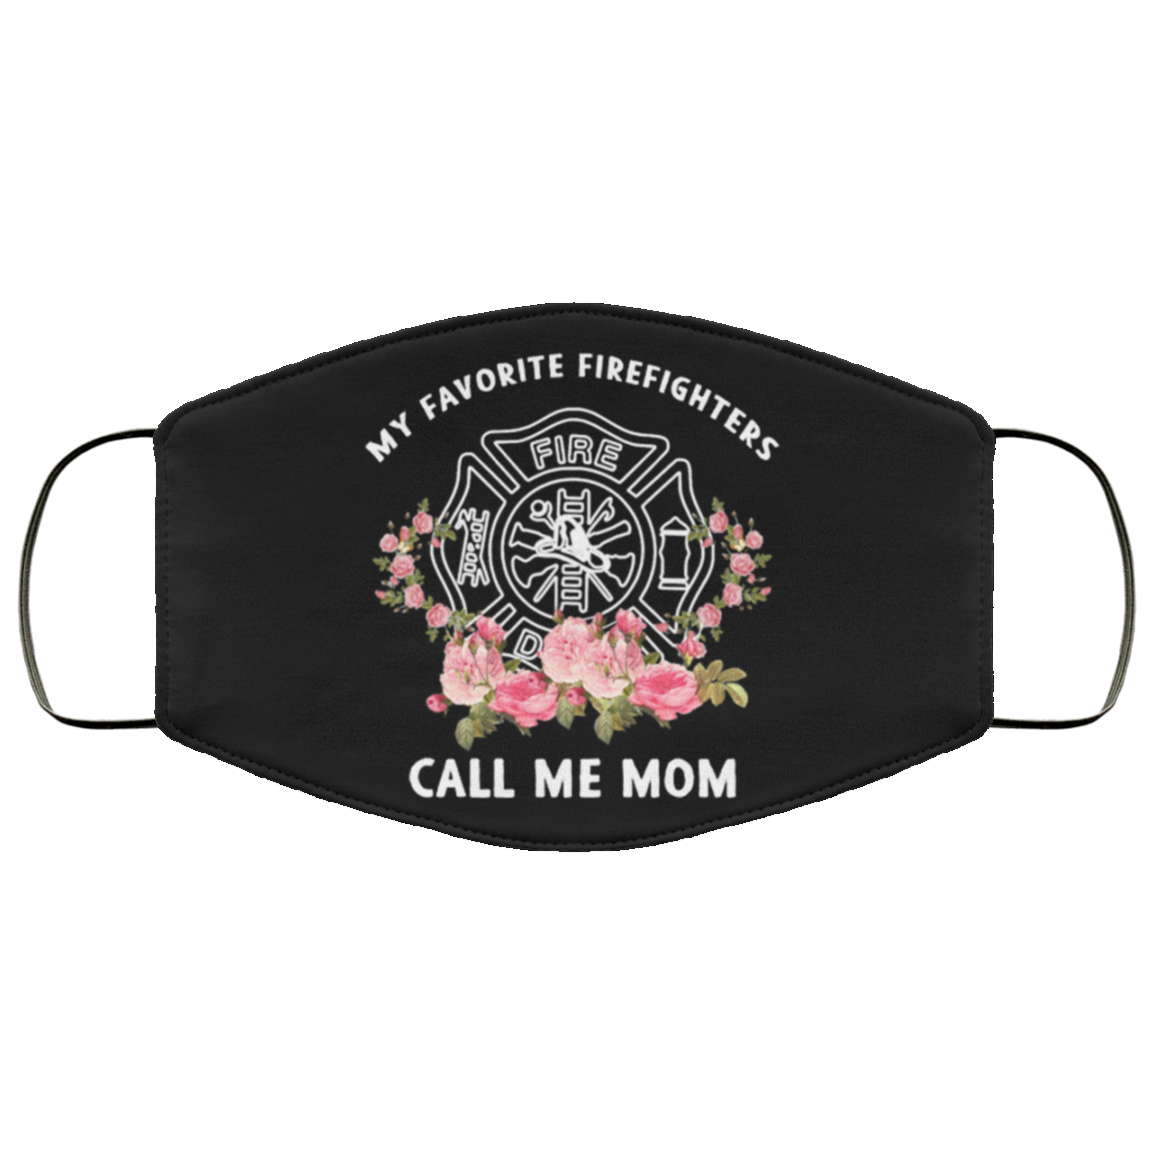 Order Firefighters' Mom Face Mask